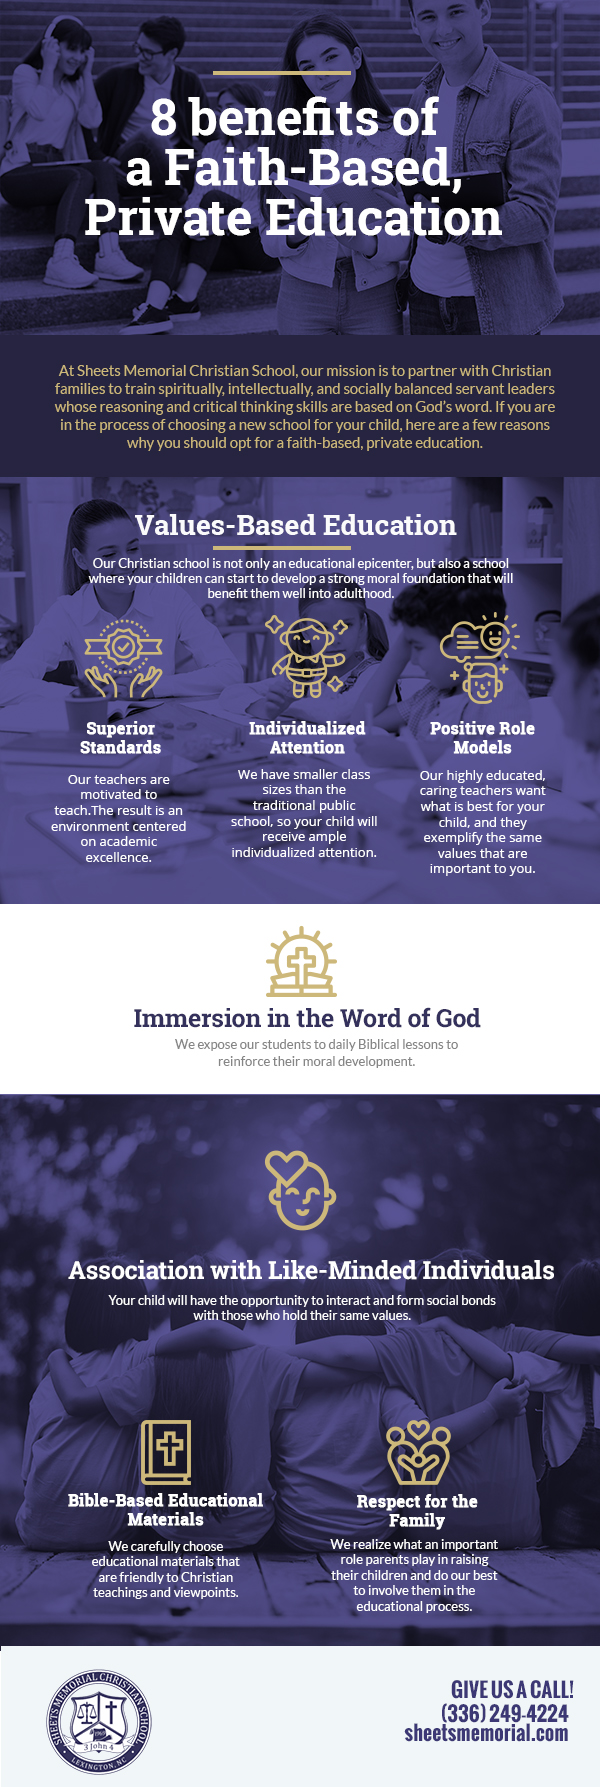 8 Benefits of a Faith-Based, Private Education [infographic]